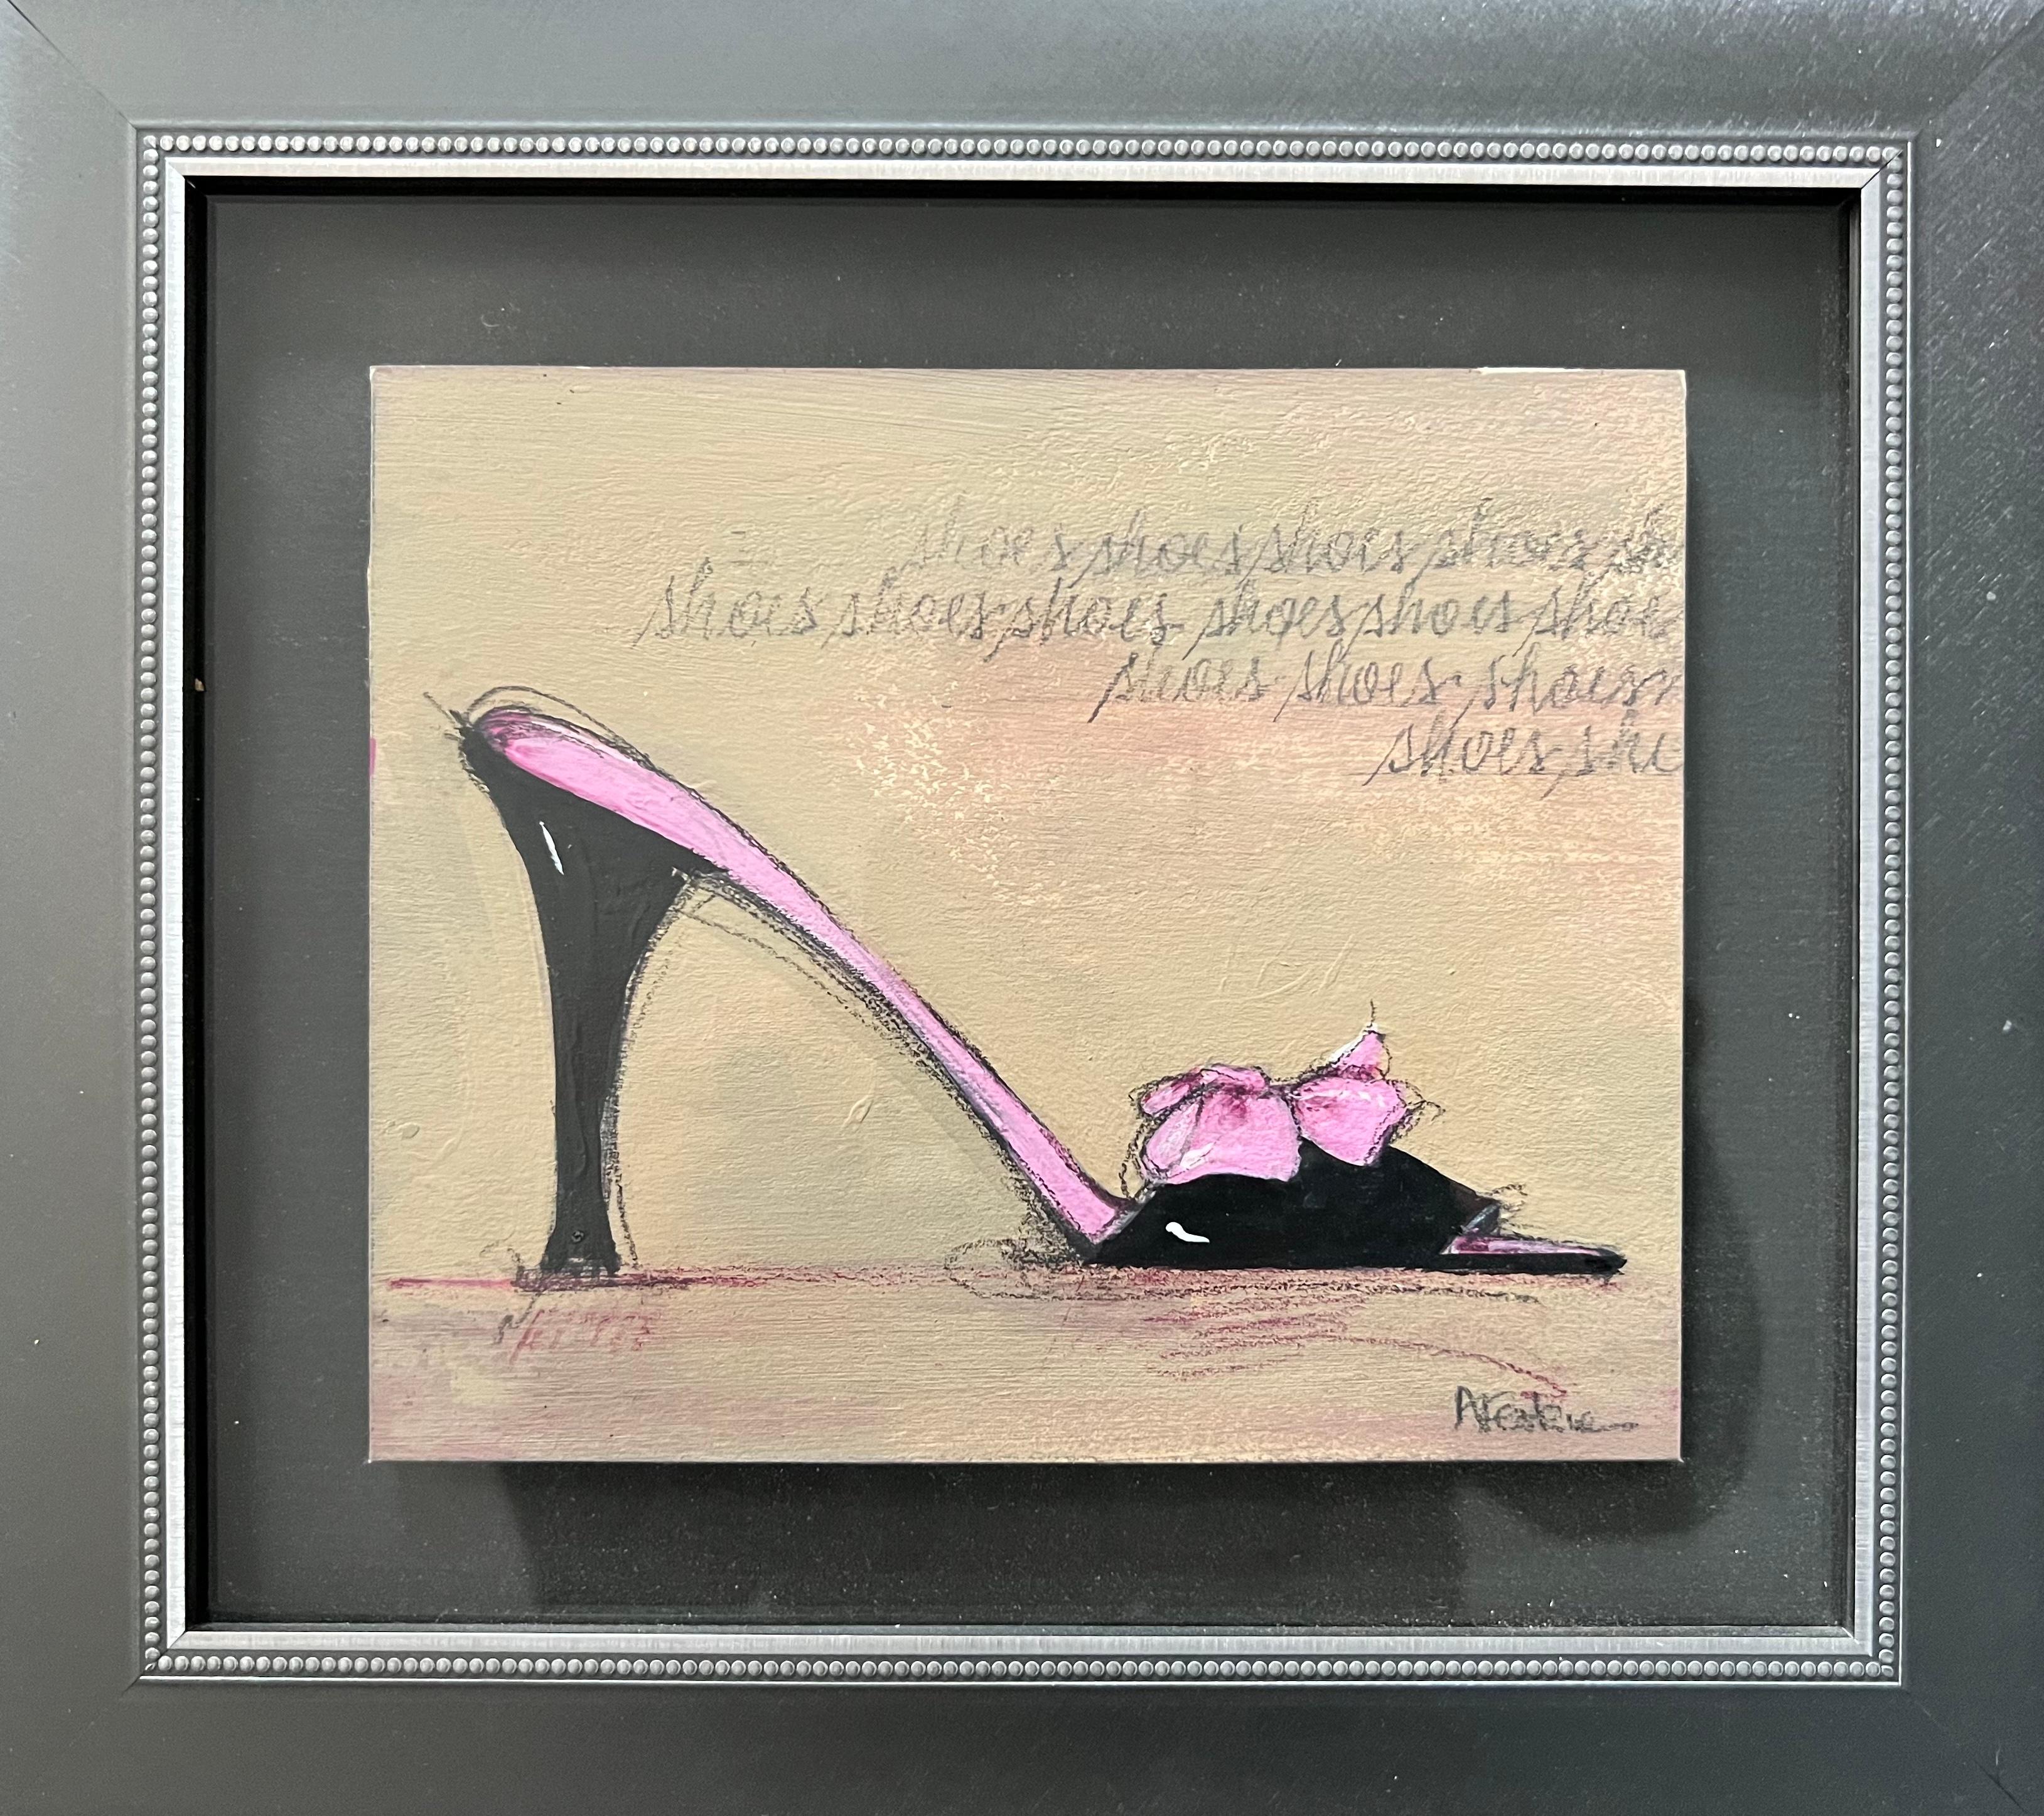 This artwork blends acrylic, pencil and color pencils in a loose style keeping it both expressive and refined. The art floats above the matte and is beautifully framed in a dark grey metal with a delicate pin dot pattern. A perfect art piece for the